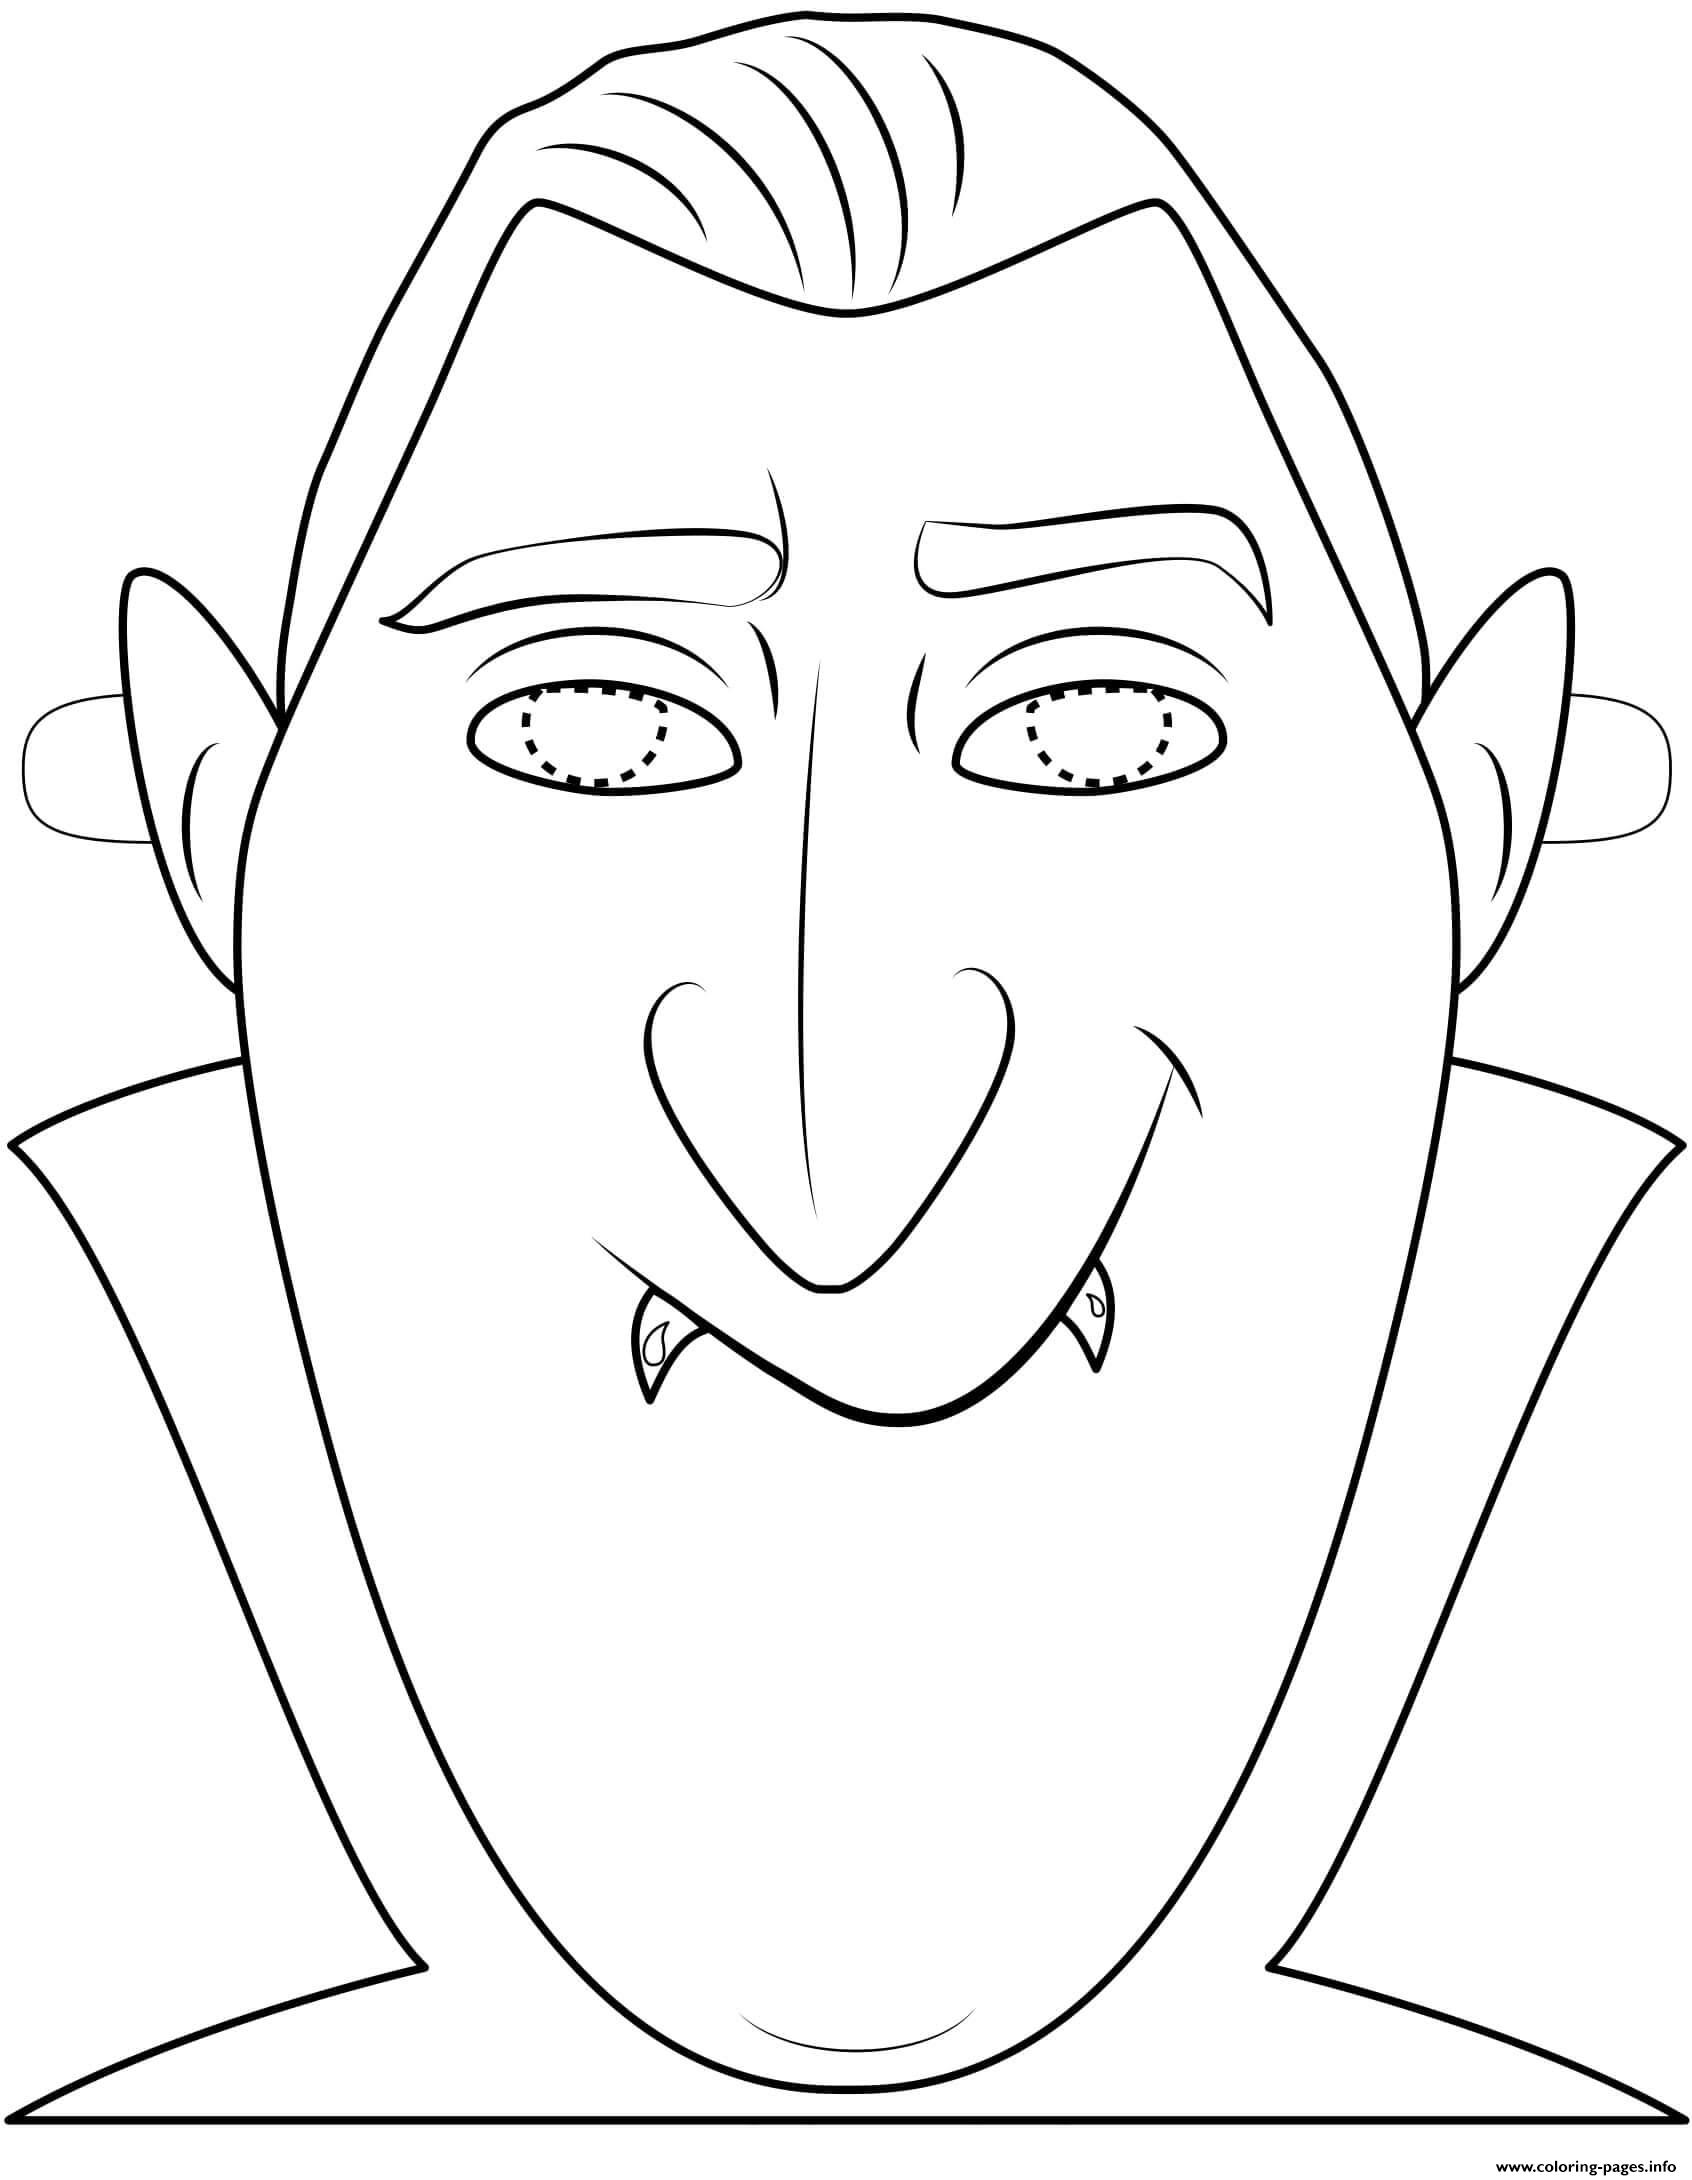 Dracula Mask Outline Halloween coloring